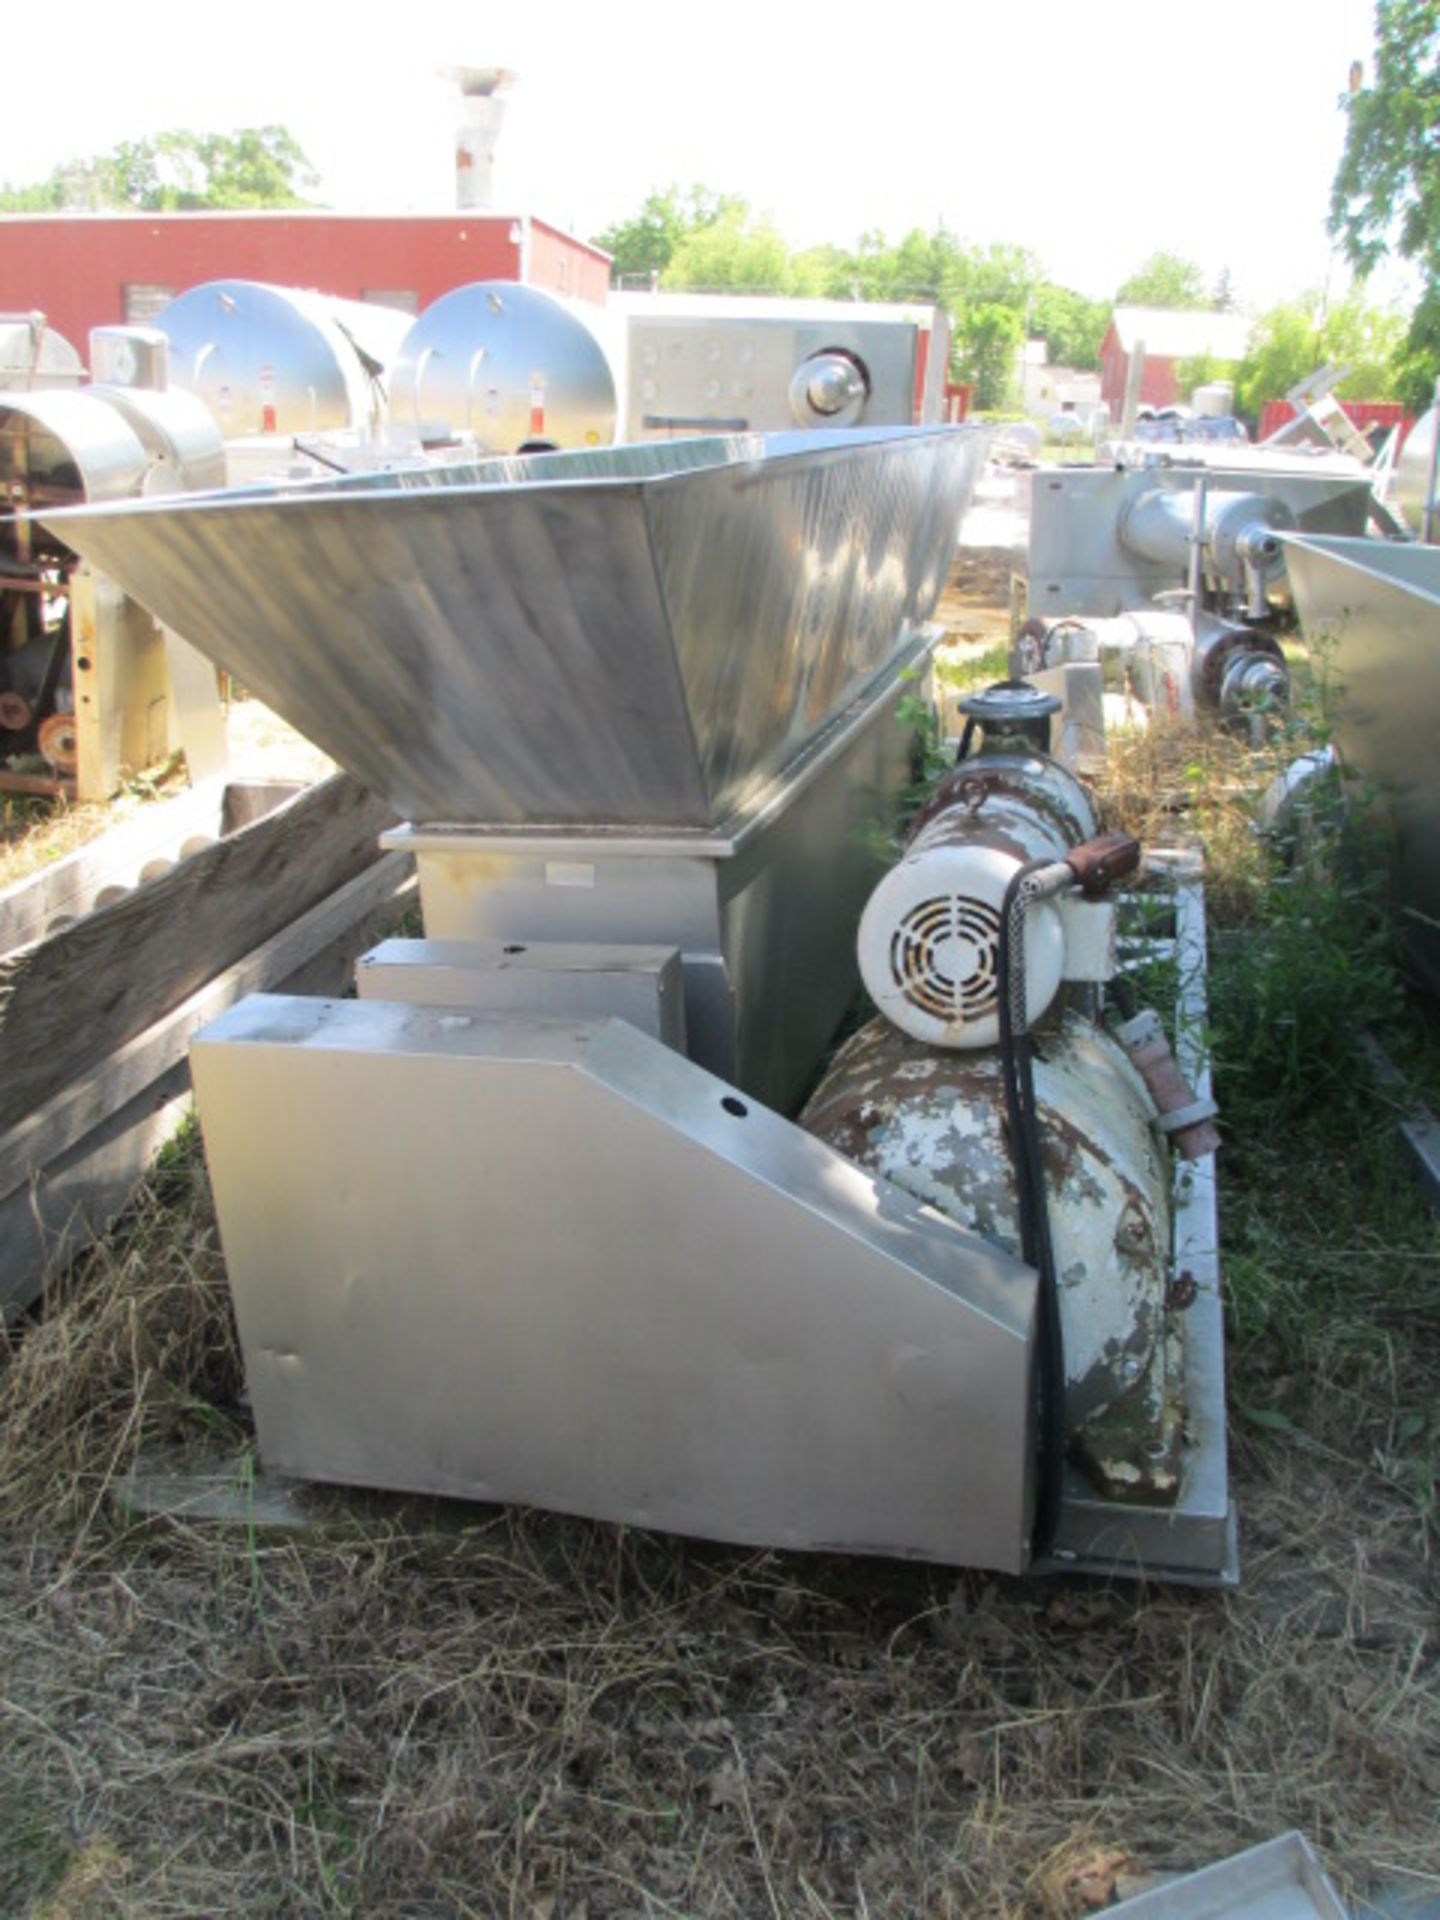 All S/S Hopper and Auger Transfer System, Dual 8"Dia X 90"L S/S Augers Feed Product to a Dual